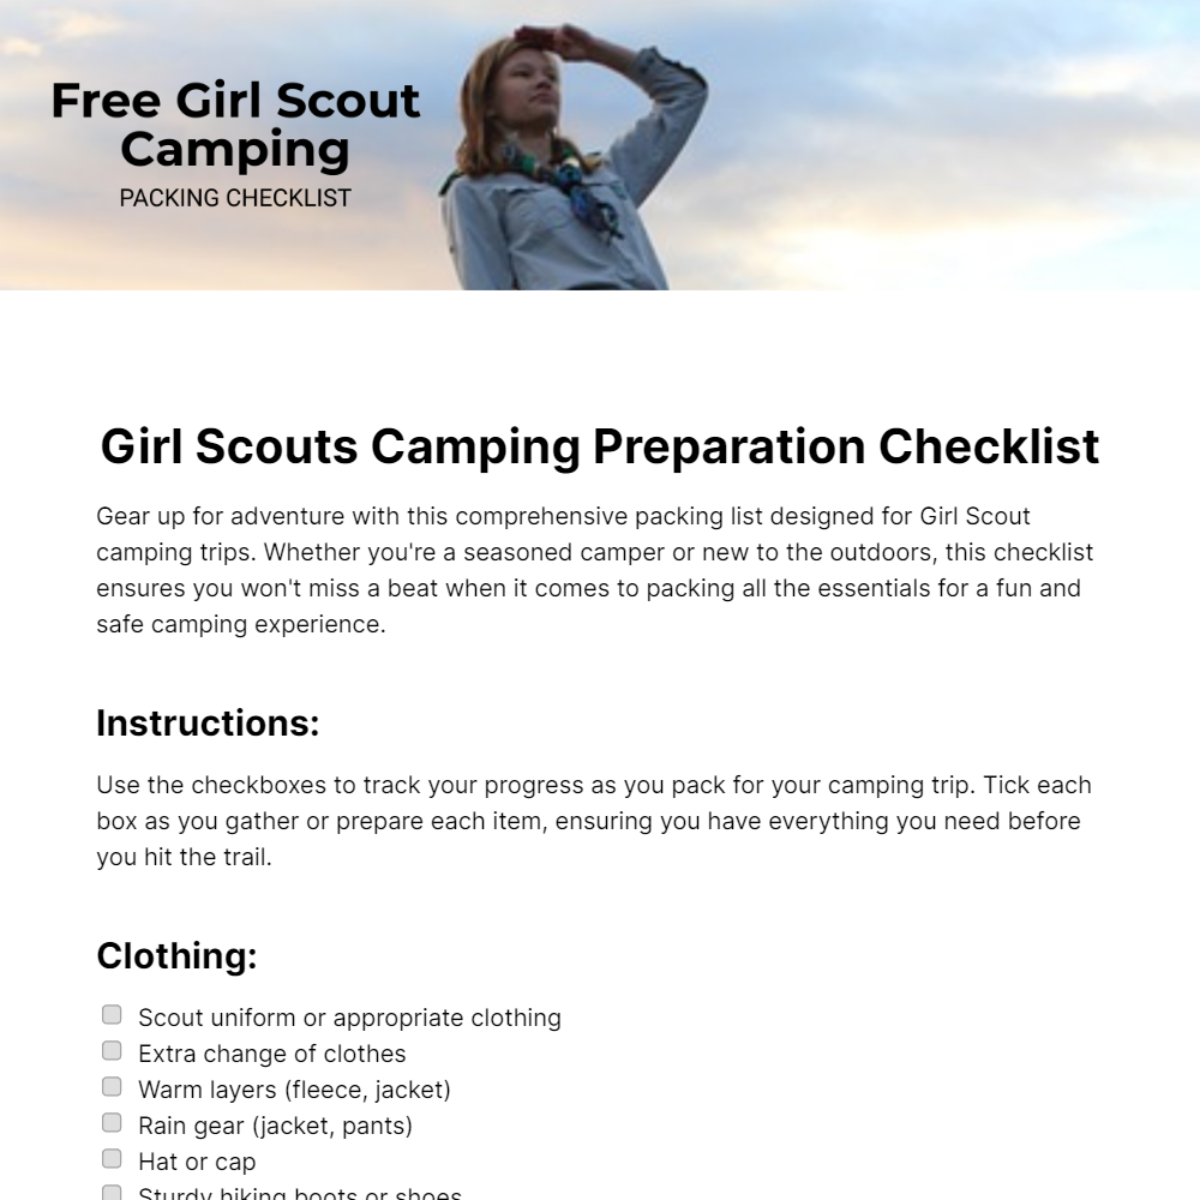 Girl Scout Camping Packing Checklist Template